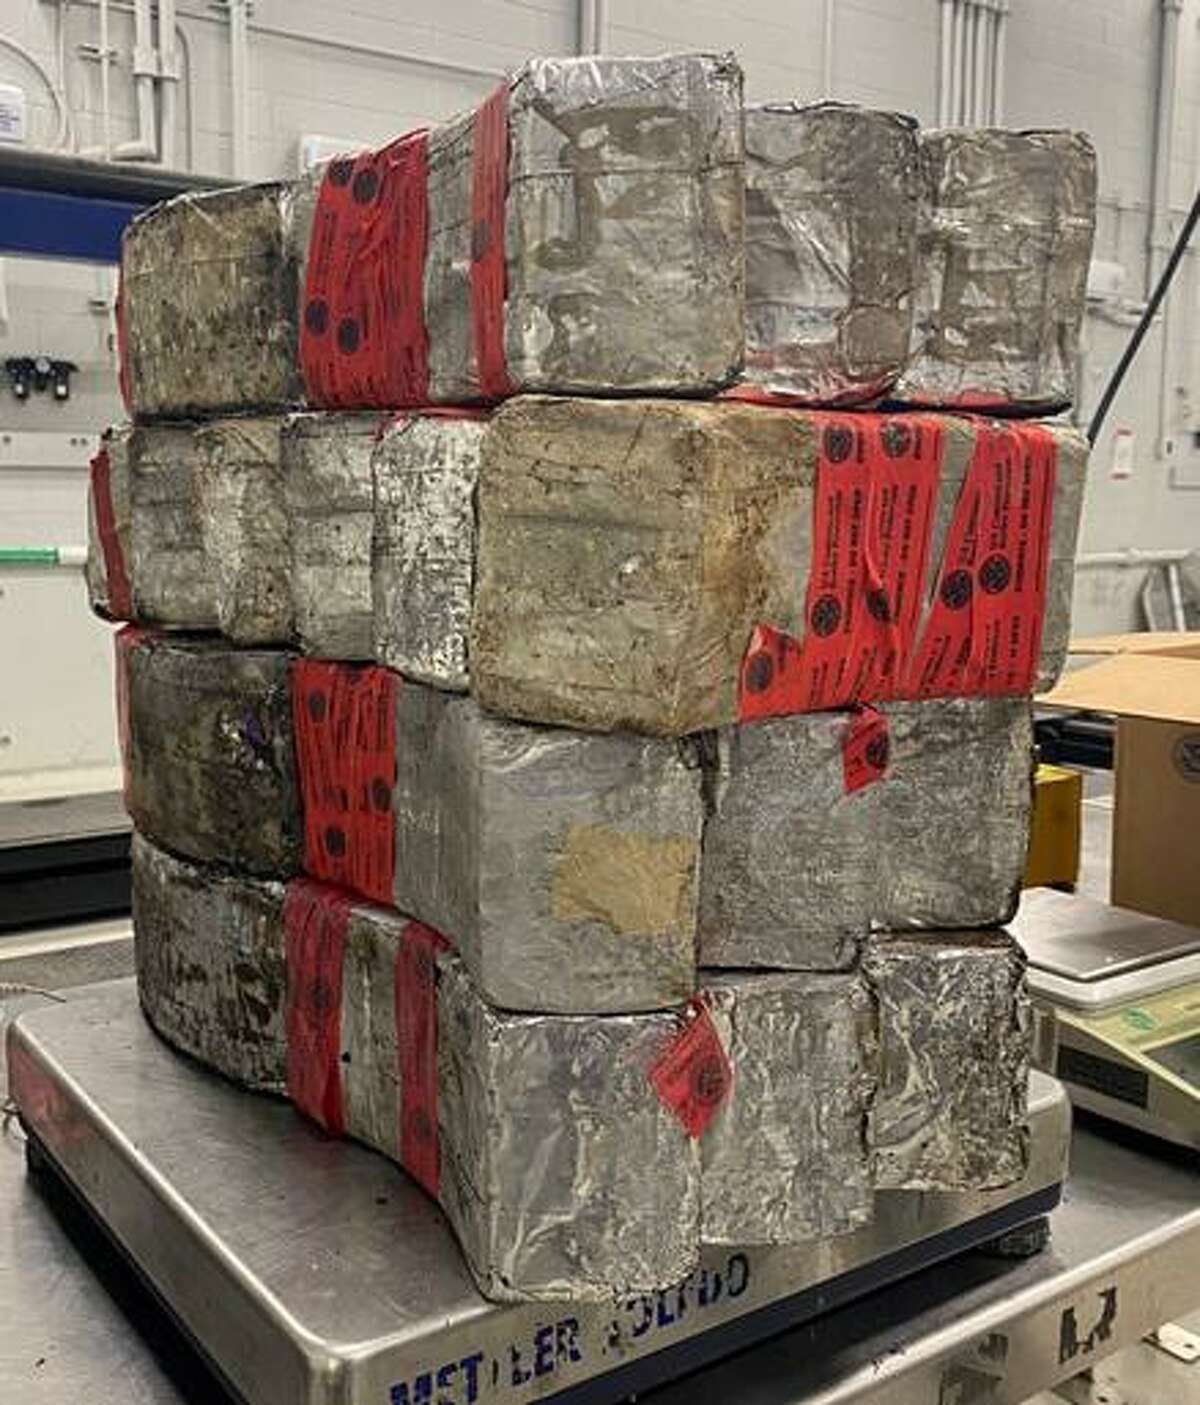 U.S. Customs and Border Protection officers said they seized 132.36 pounds of meth valued at about $2.6 million at the Juarez-Lincoln International Bridge. One person has been indicted in connection with the case.